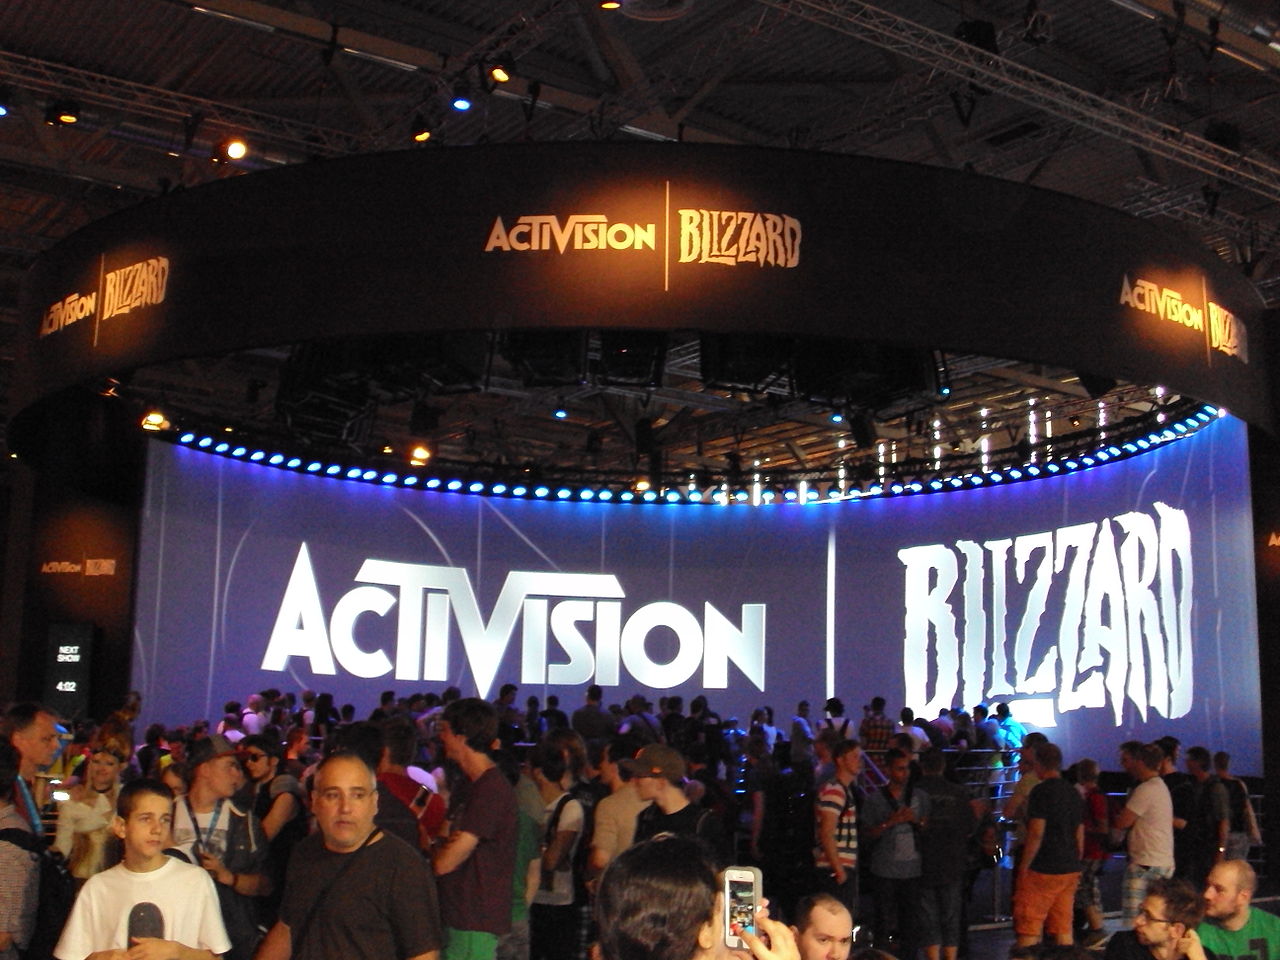 Microsoft gets EU approval for $69 Billion Activision Blizzard Deal